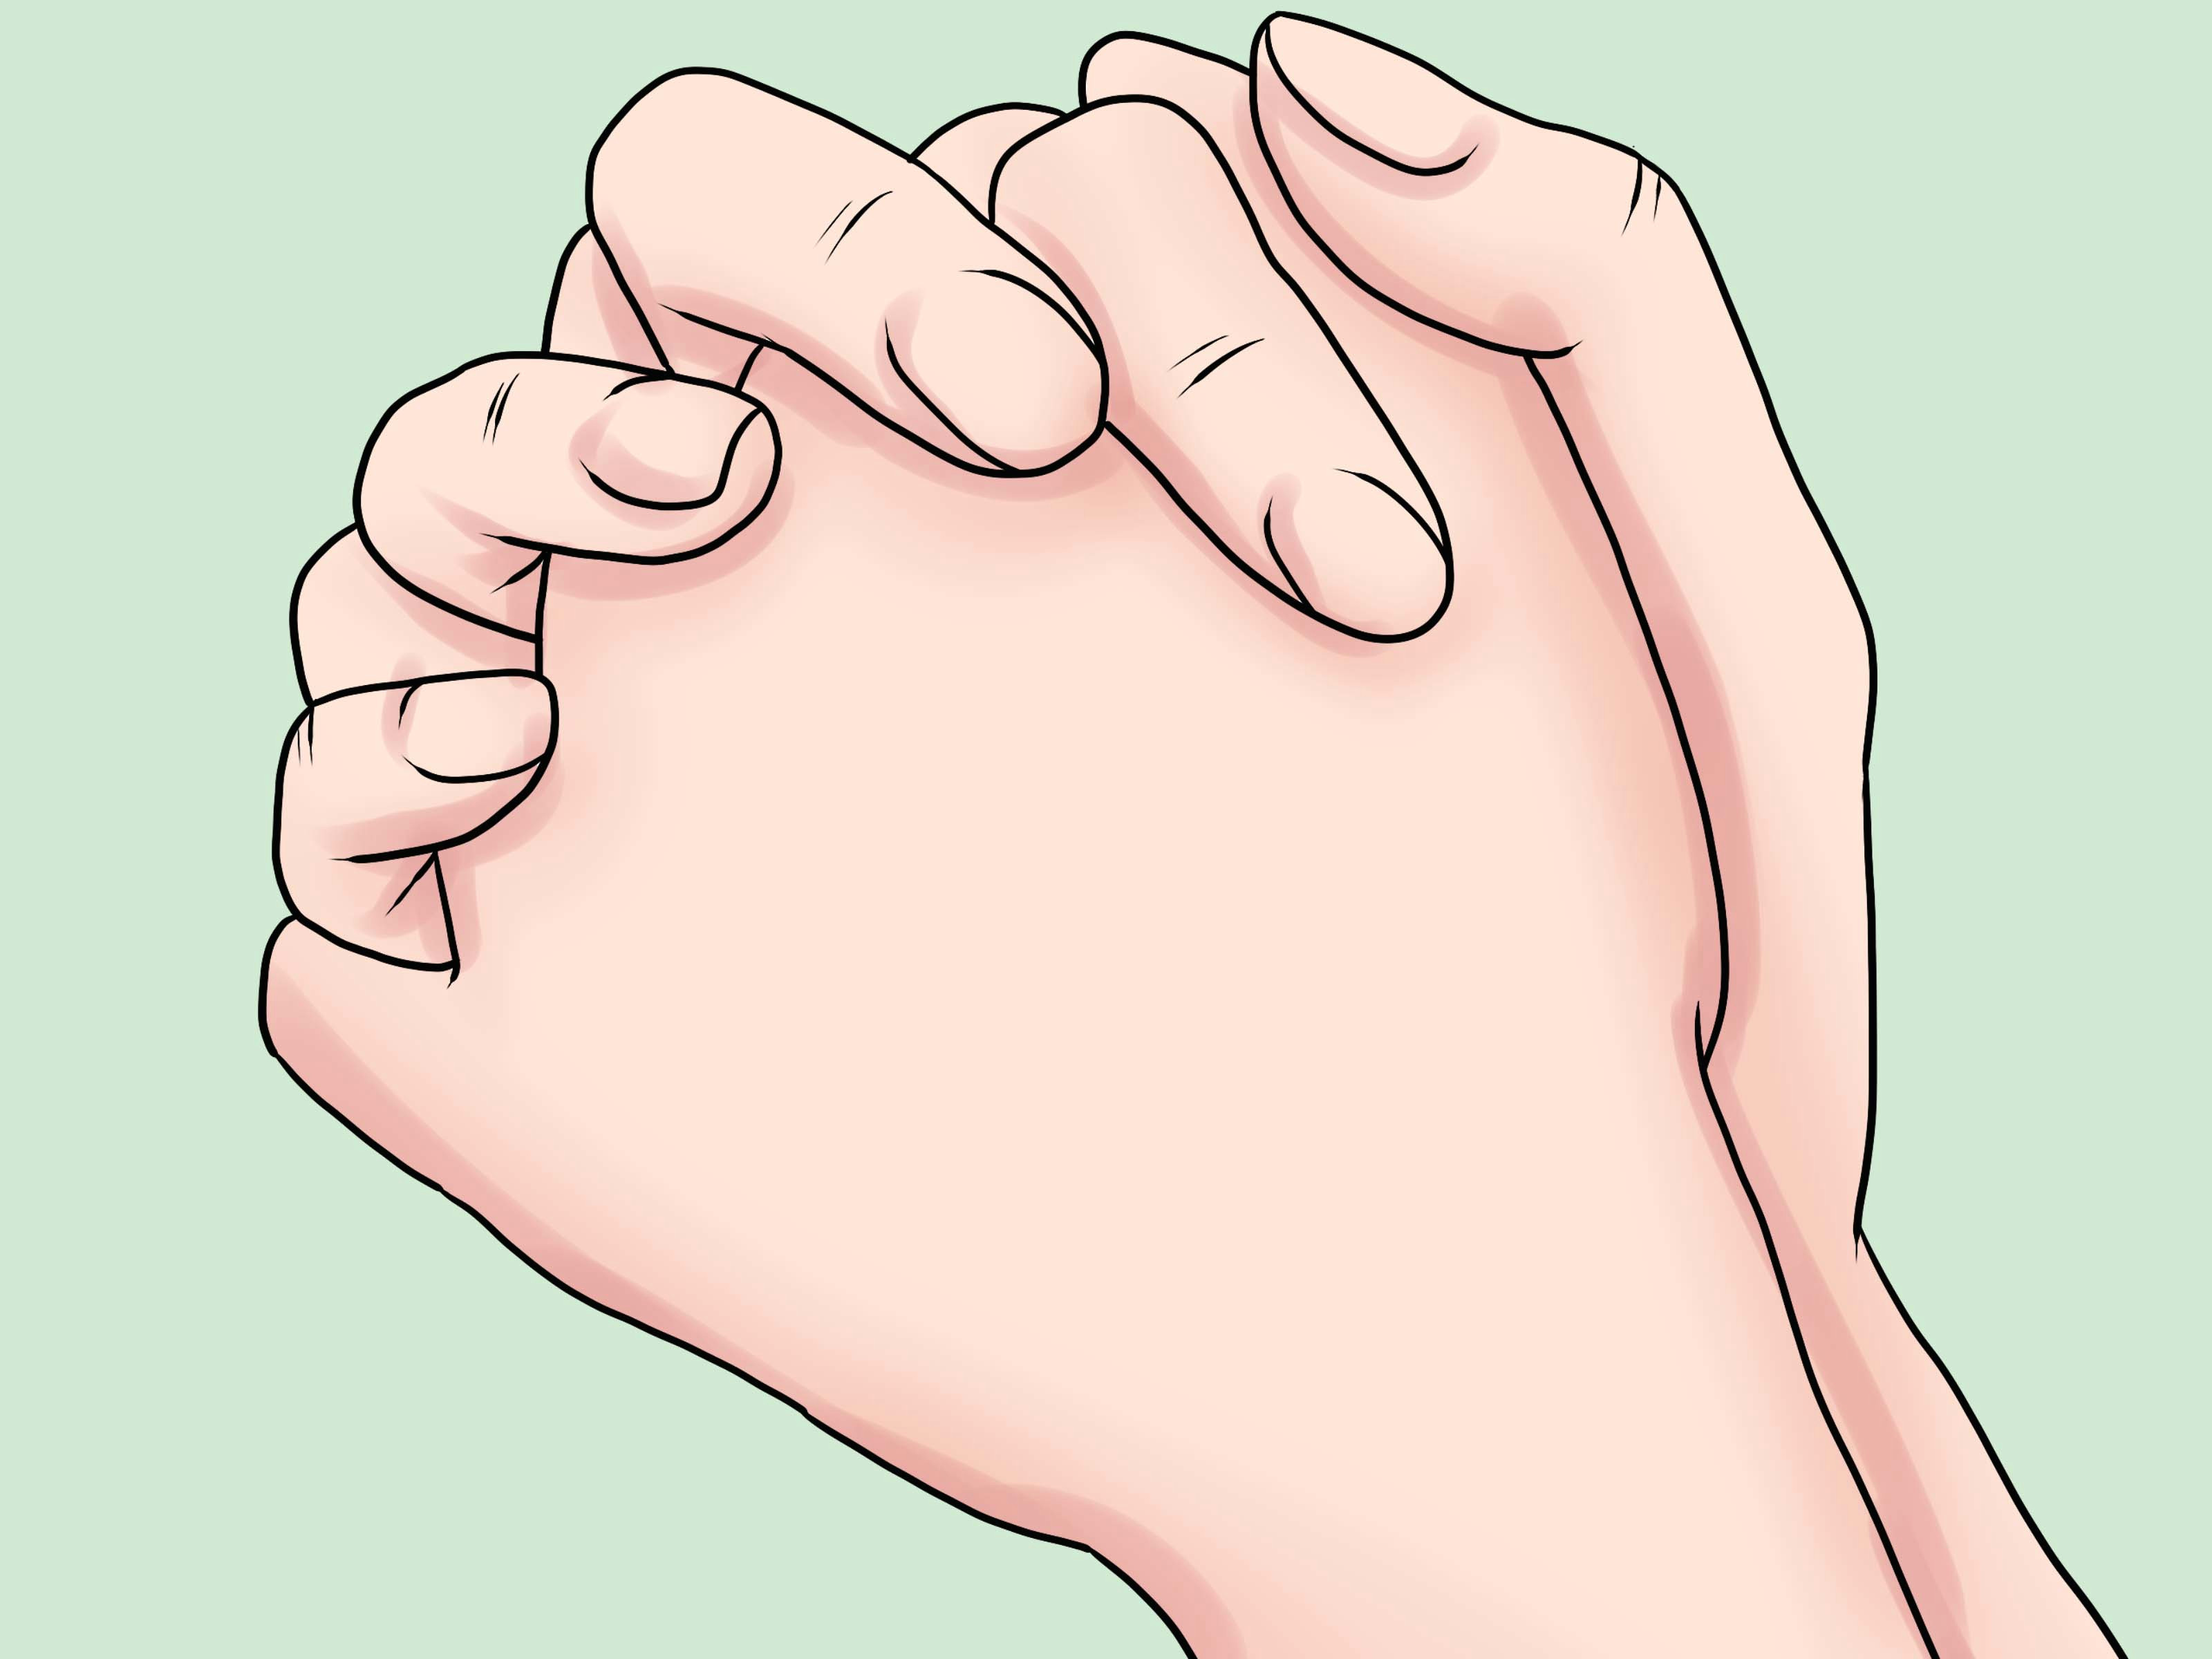 how to pray to god beginners